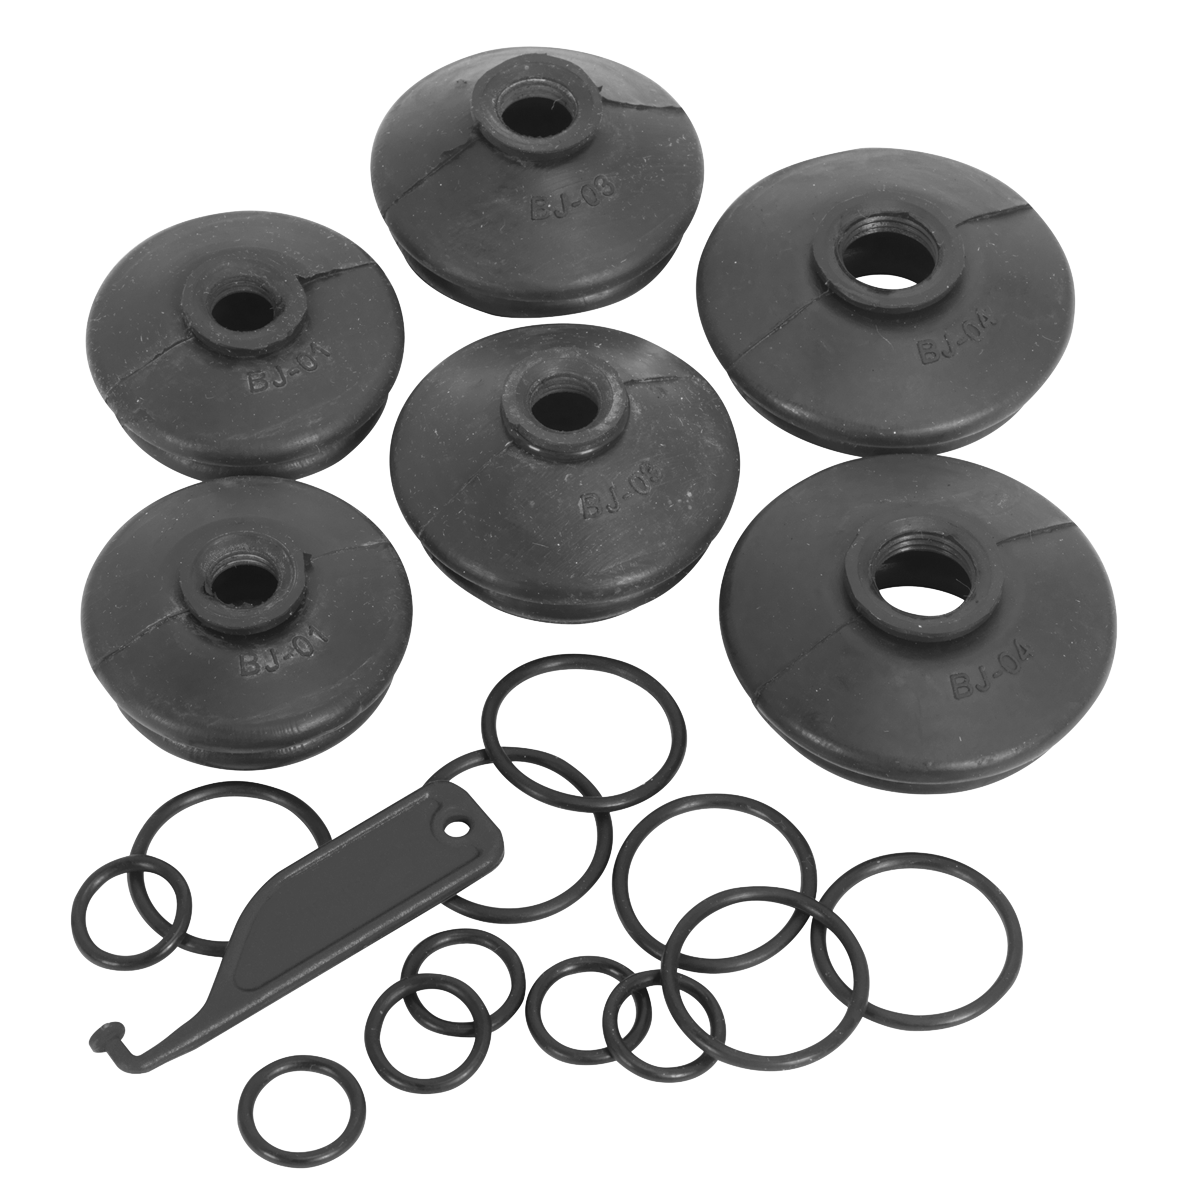 Sealey Ball Joint Dust Covers - Car Pack of 6 Assorted